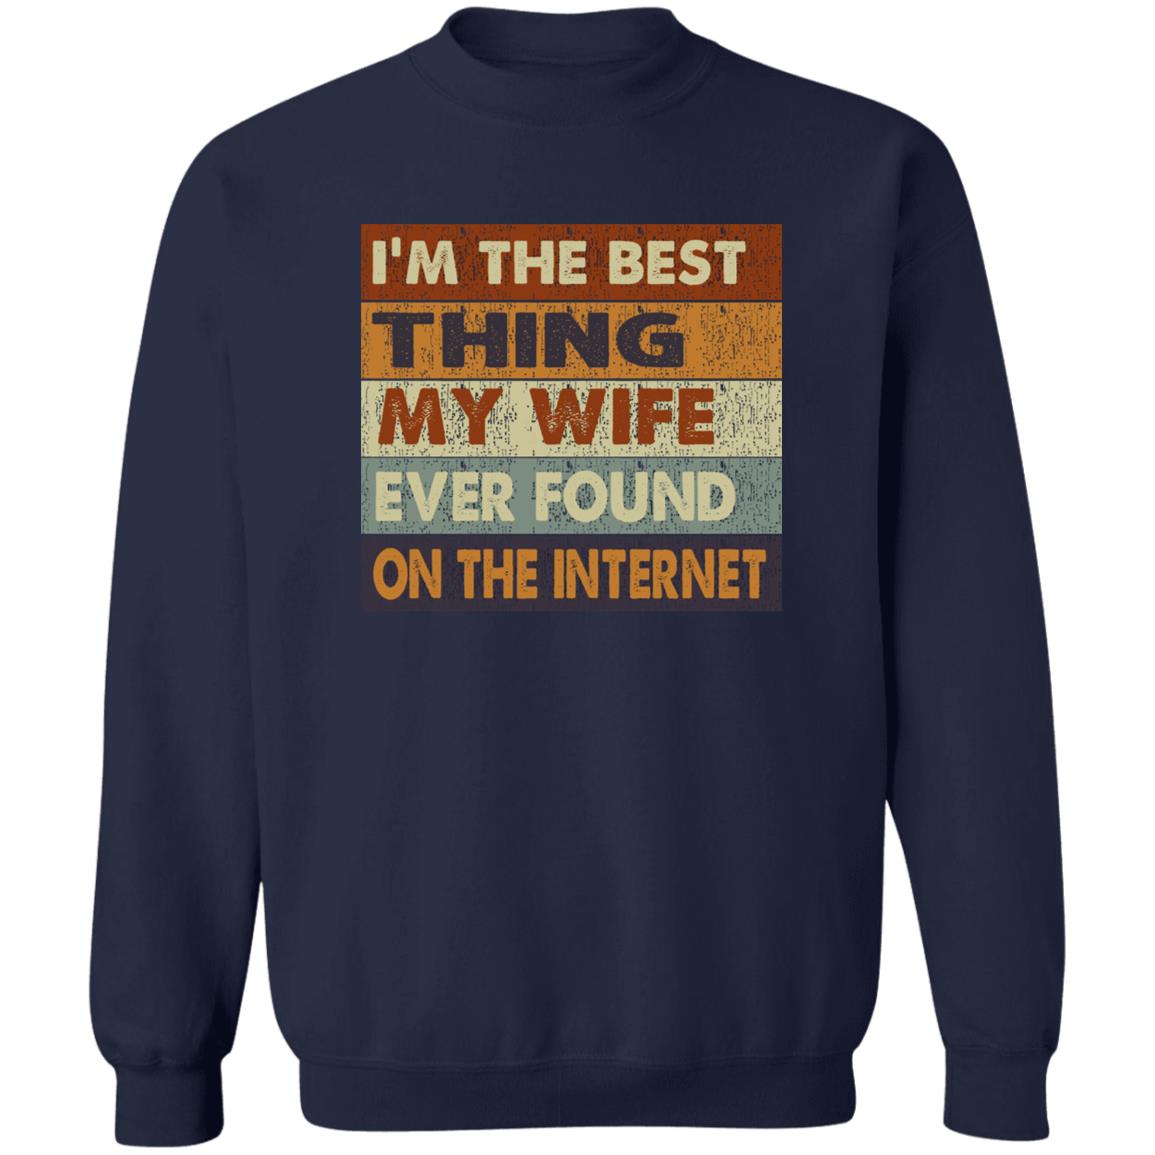 I'm the best thing my wife ever found on the internet sweatshirt